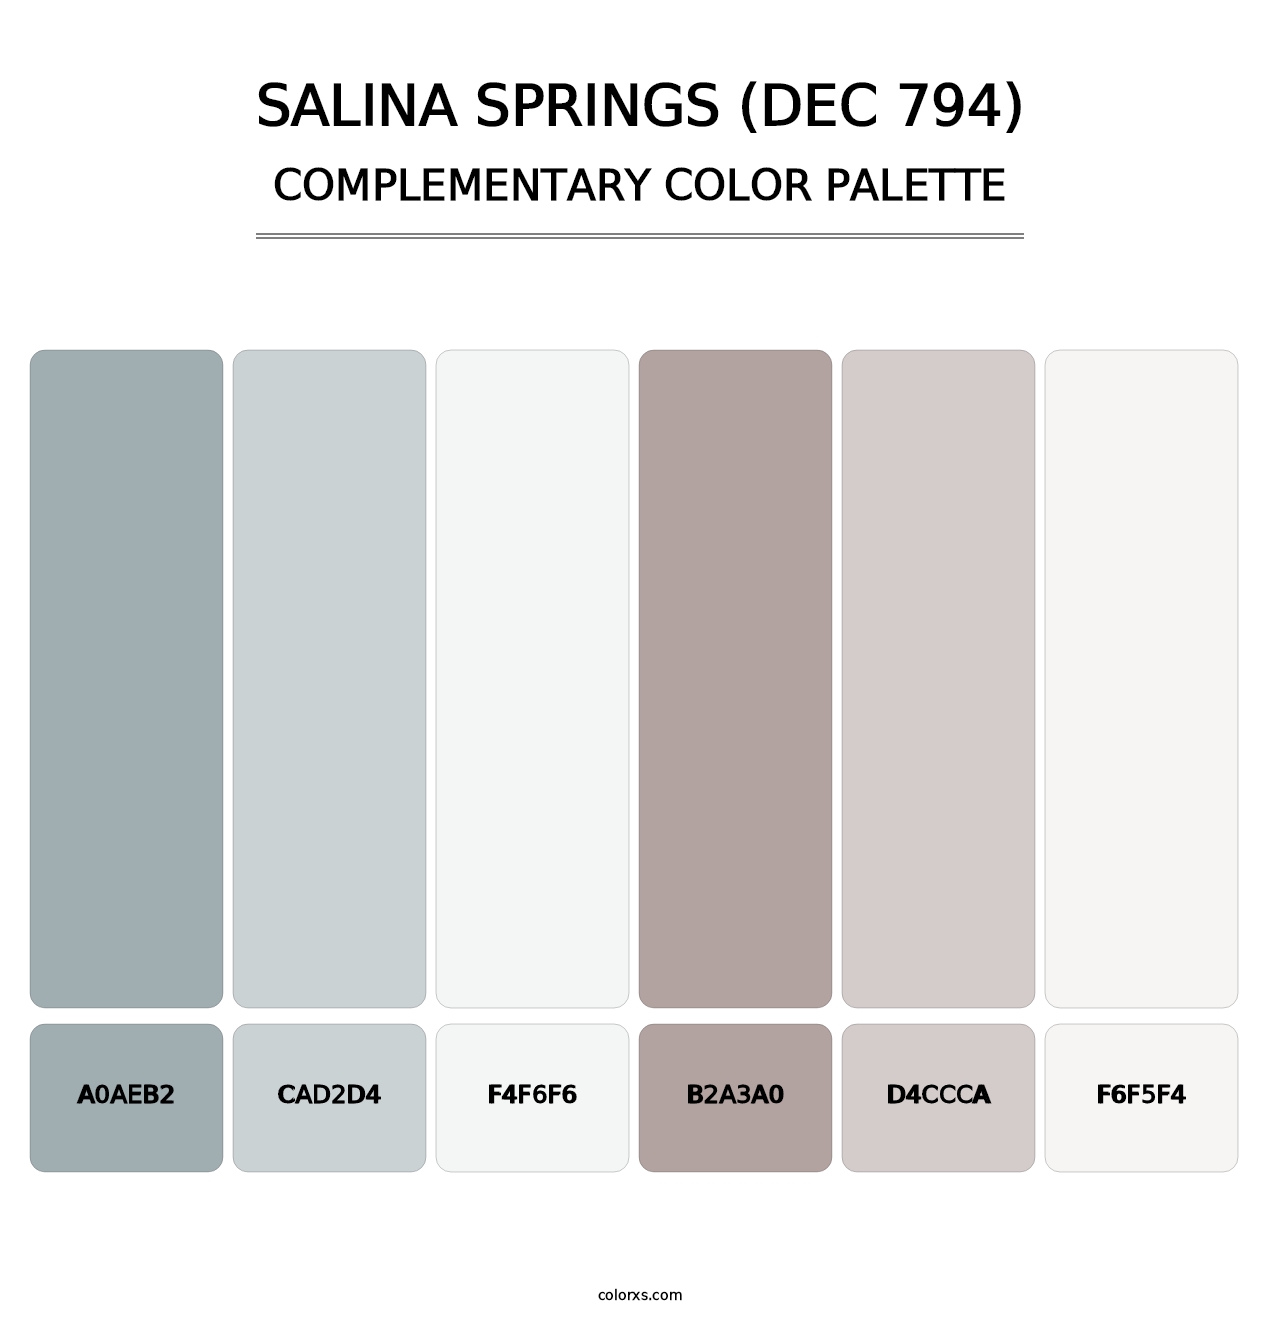 Salina Springs (DEC 794) - Complementary Color Palette